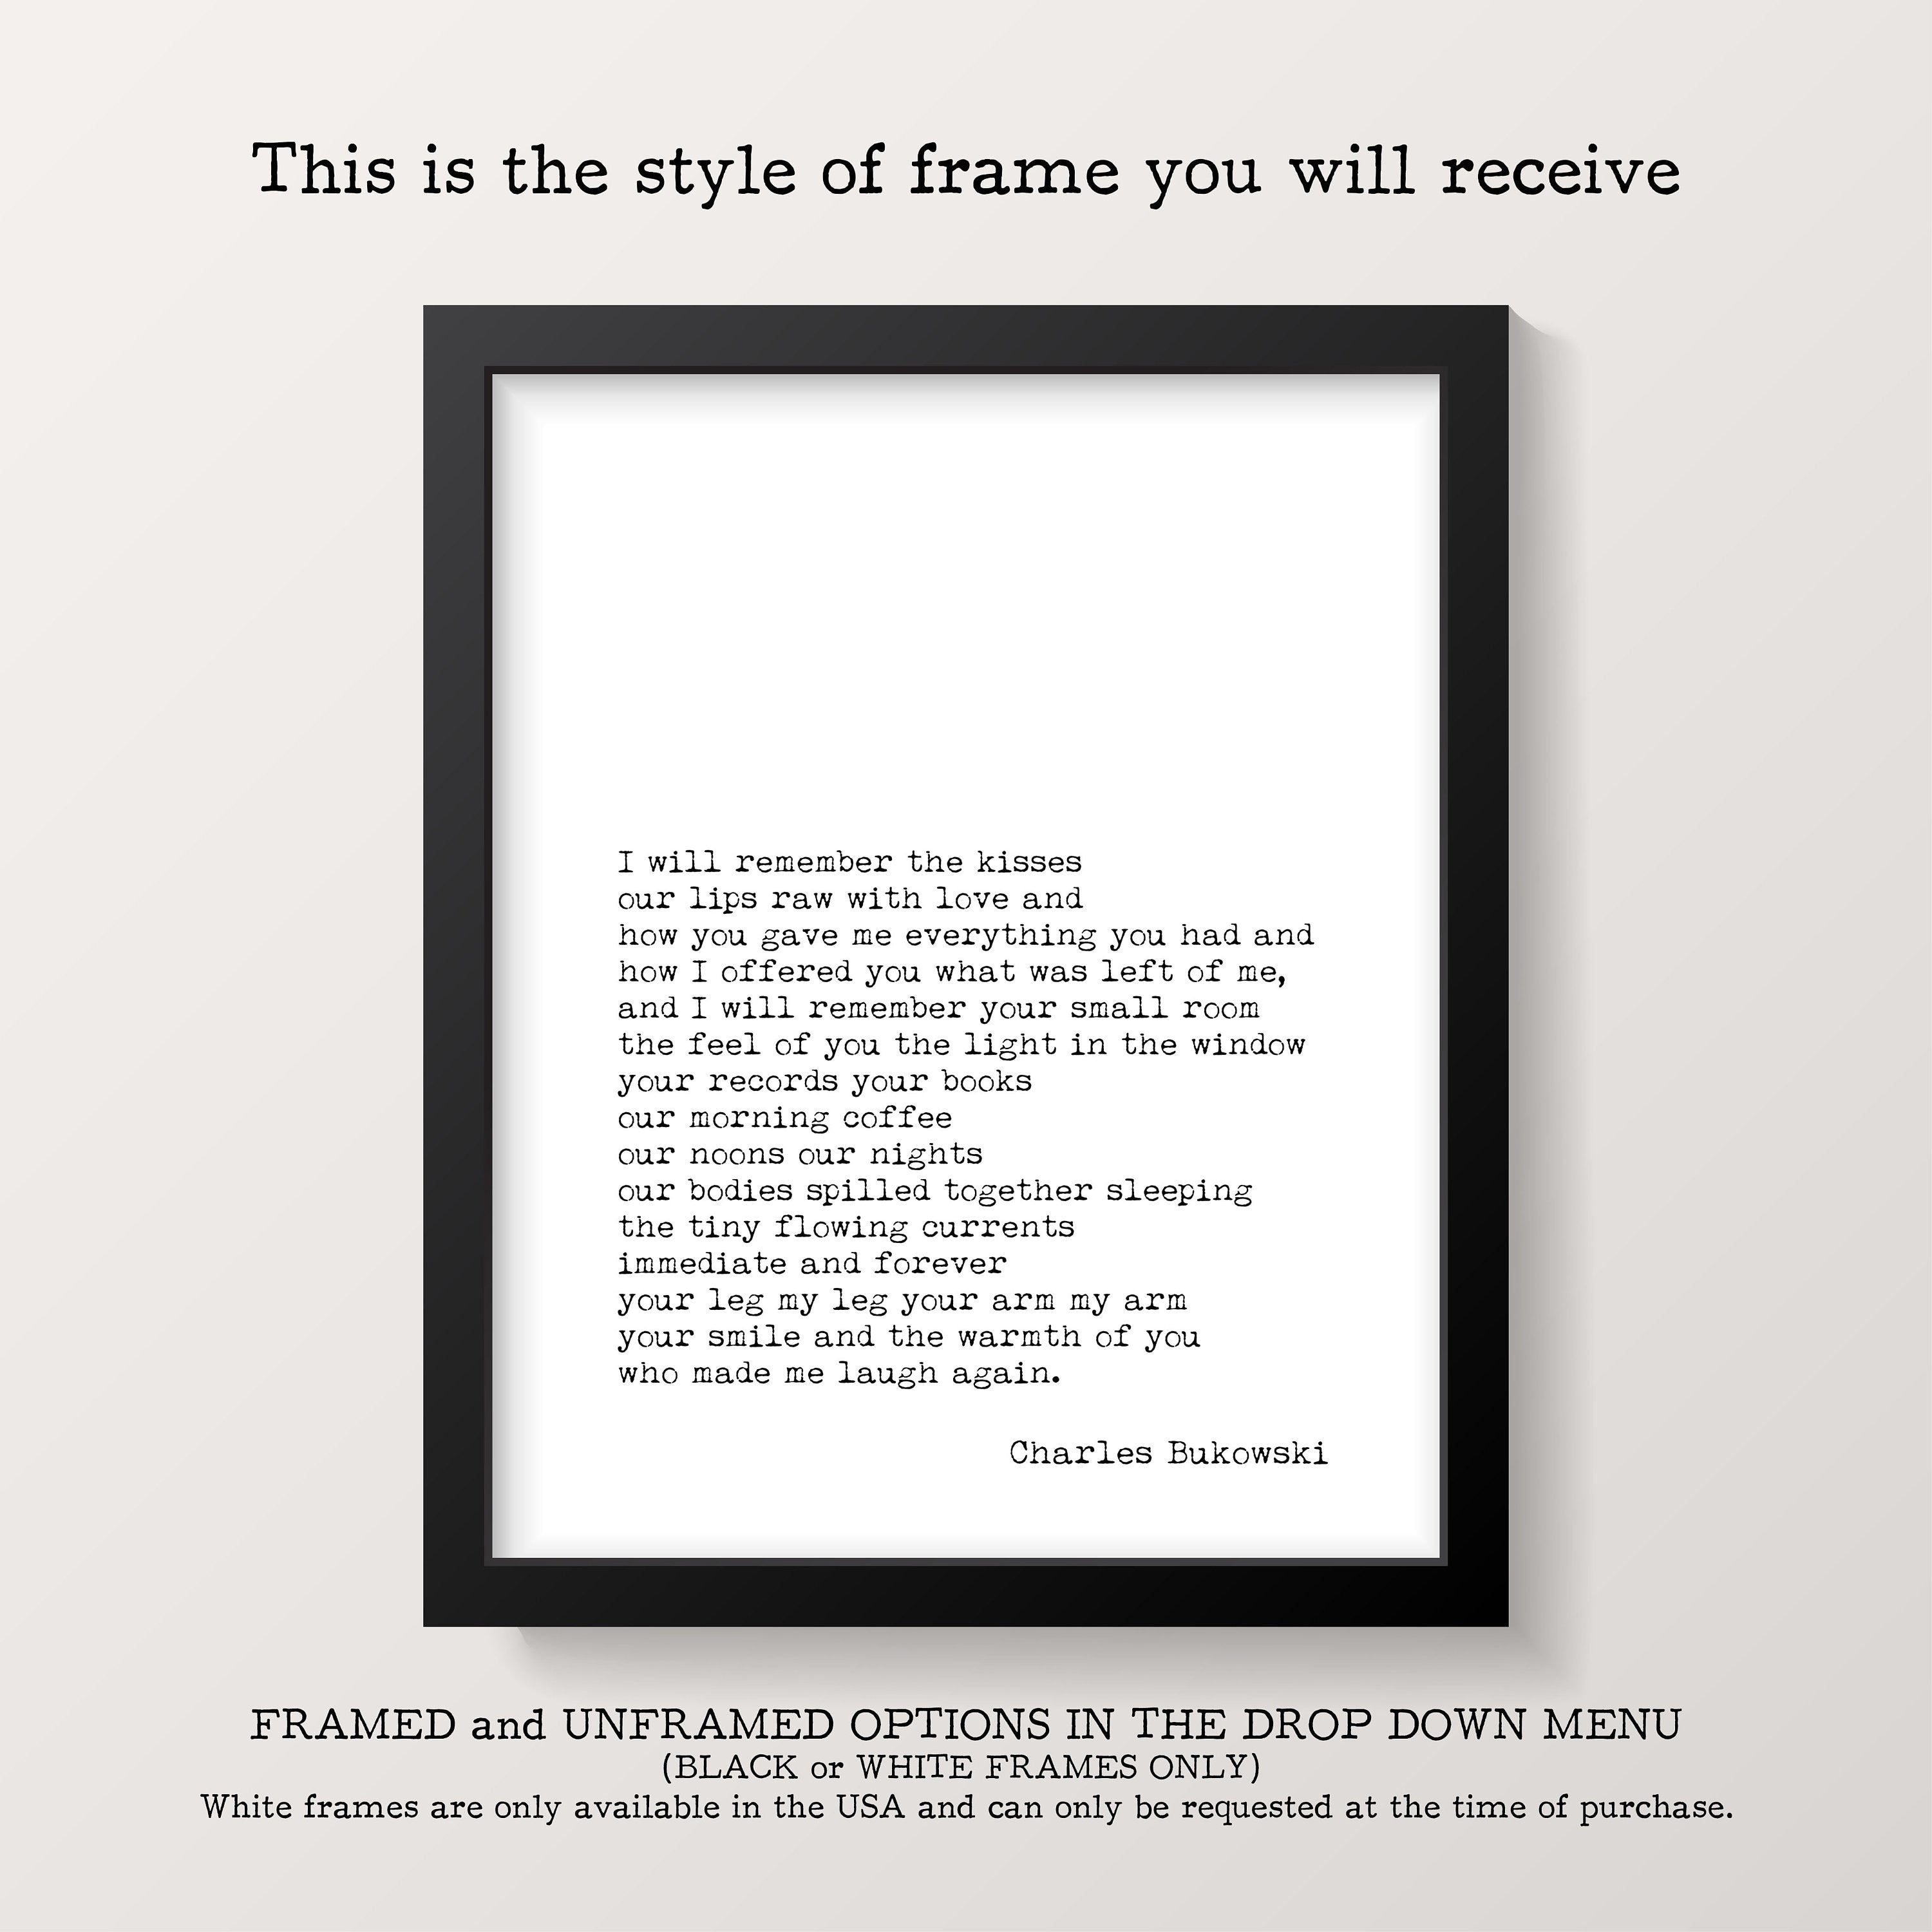 I have found what you are like Love Poem by e e cummings art print, Unframed & Framed Art Quote Wall Decor